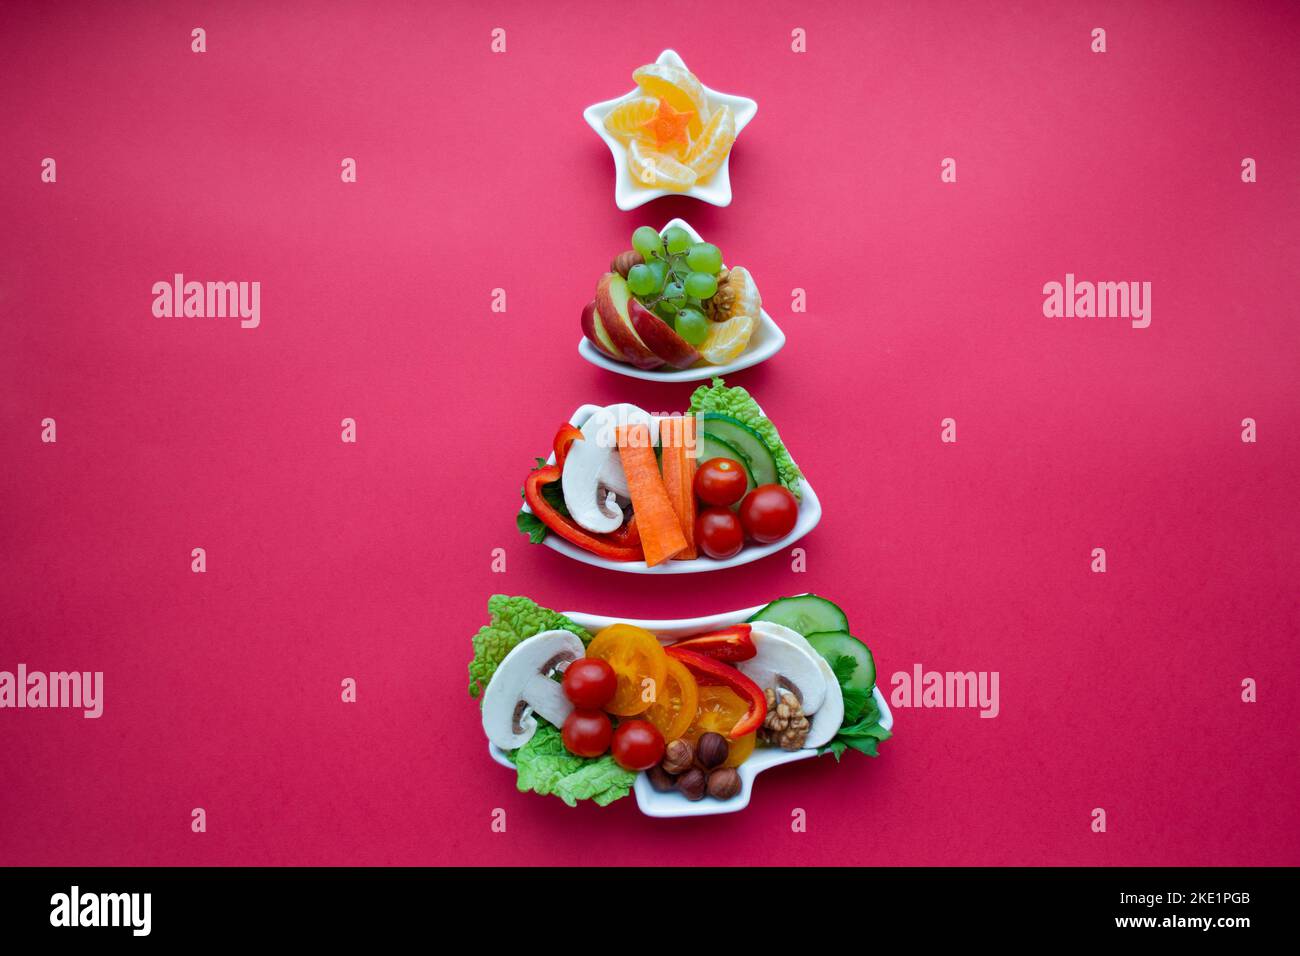 Plate in the form of a Christmas tree with vegetables, fruits, mushrooms and berries. Red background. The concept of vegetarian treats for the holiday Stock Photo